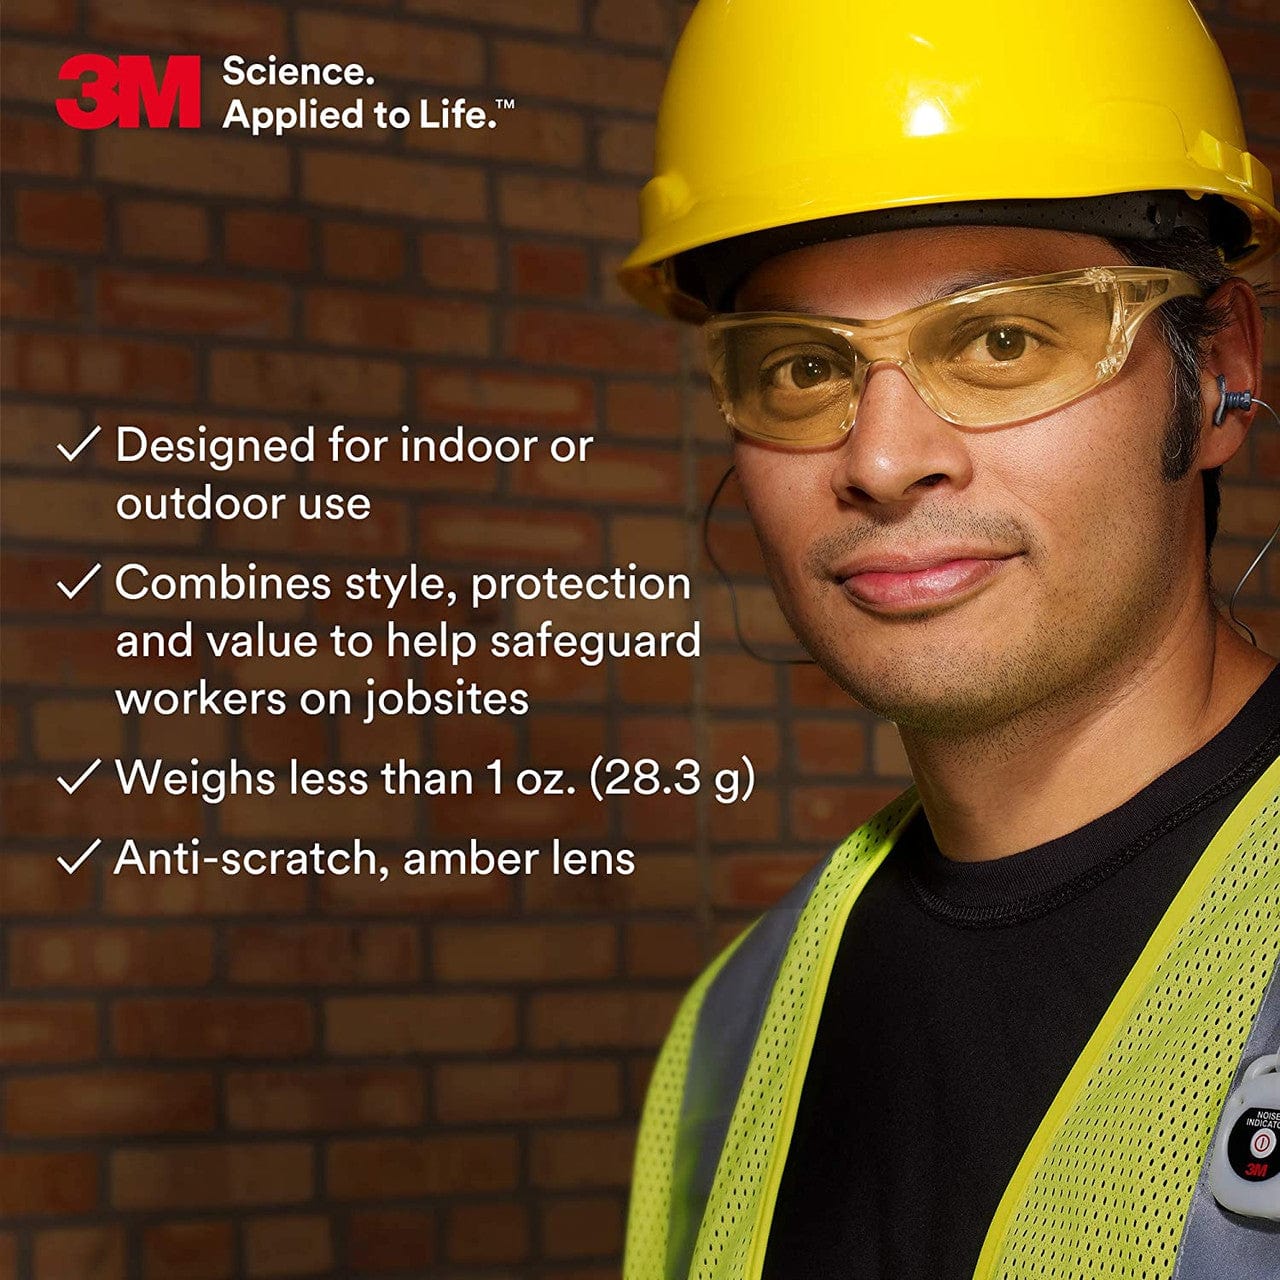 3M Virtua AP Safety Glasses with Amber Lens 11817 Specs